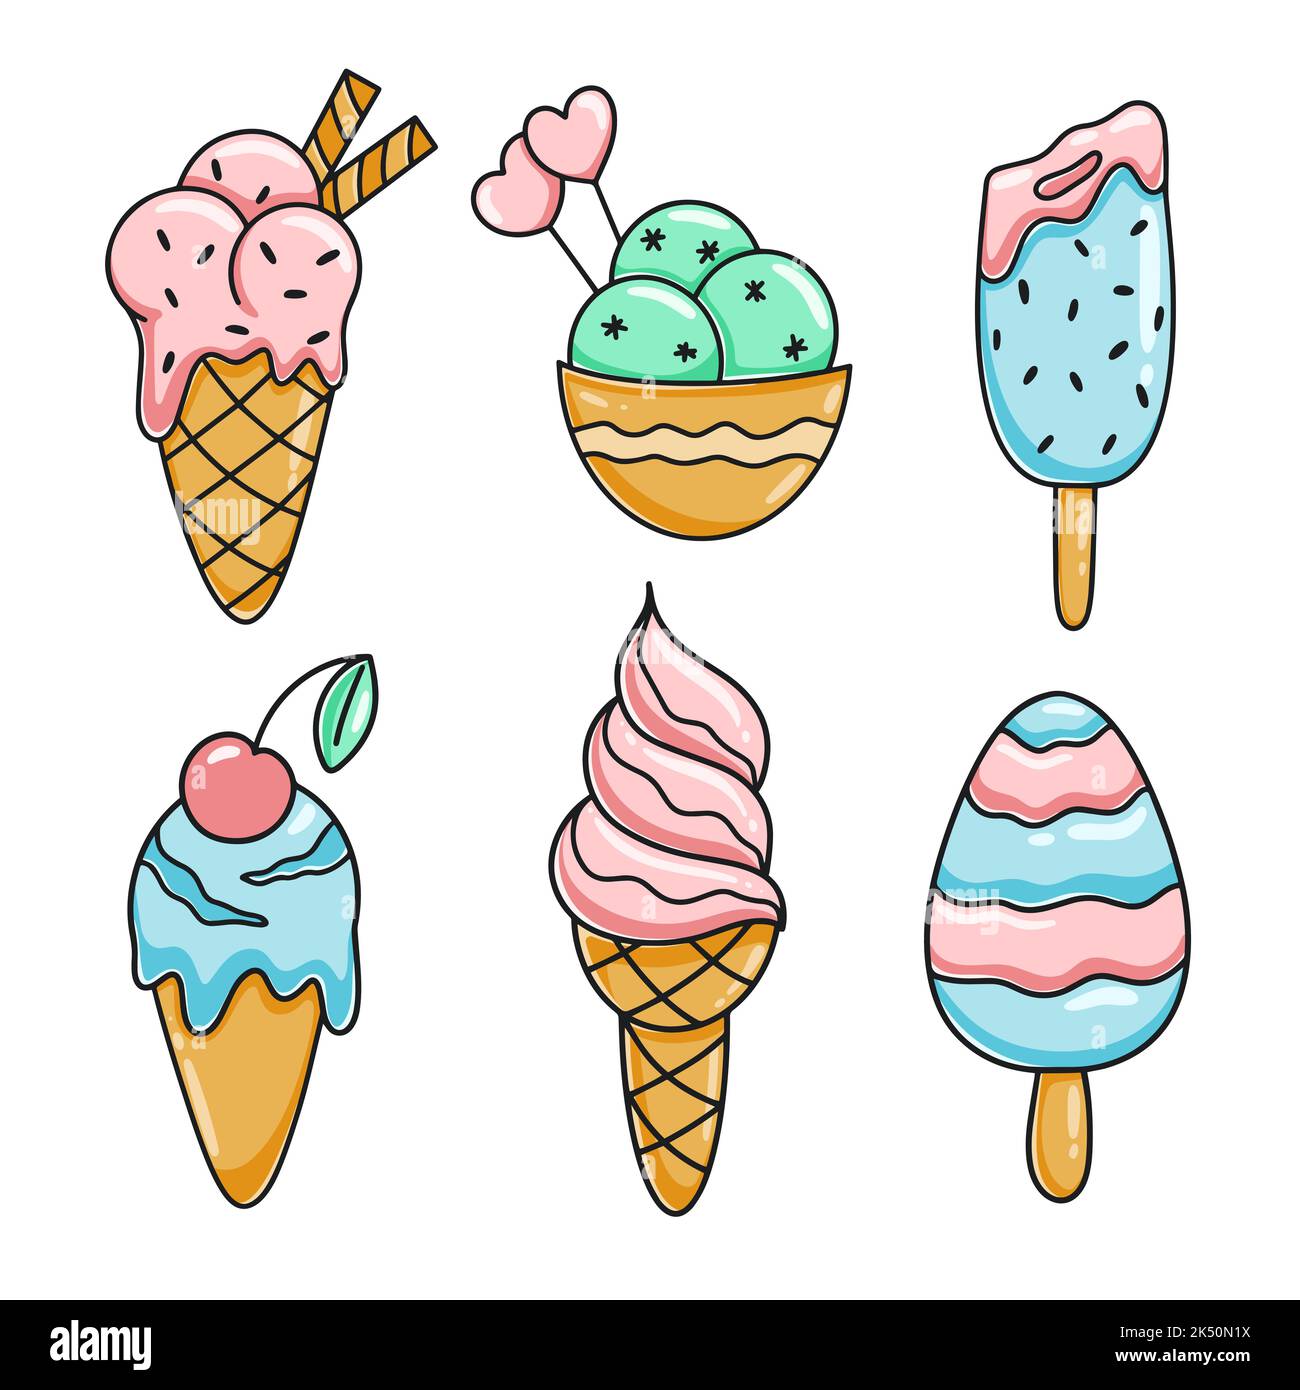 https://c8.alamy.com/comp/2K50N1X/ice-cream-cartoon-clipart-set-collection-hand-drawn-dairy-cold-dessert-ice-cream-in-bowl-cone-popsicle-in-glaze-isolated-vector-illustration-2K50N1X.jpg